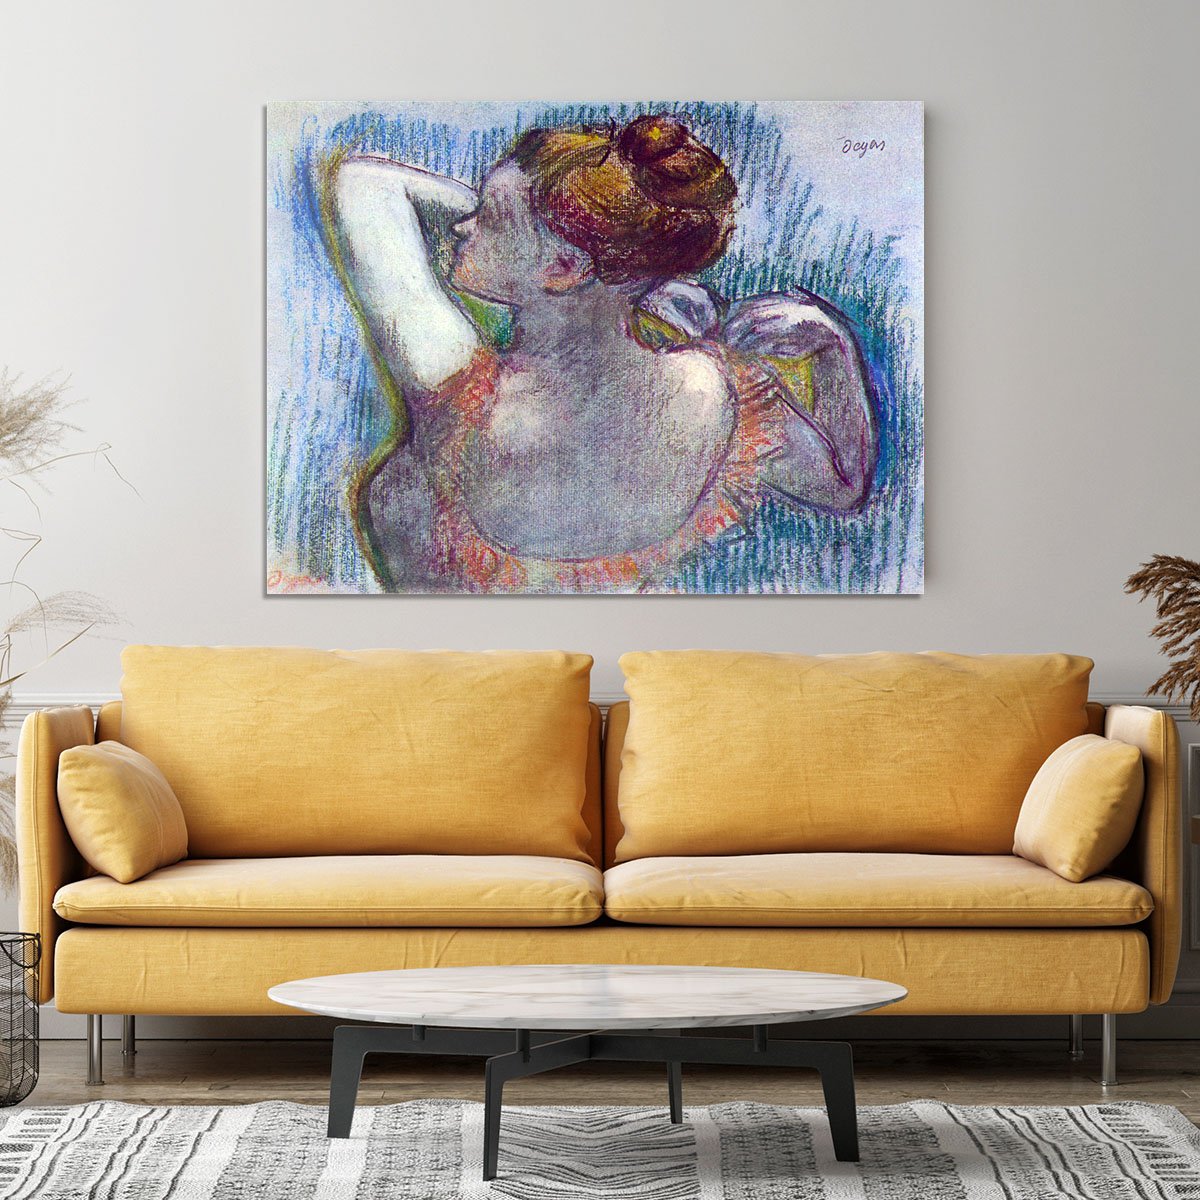 Dancer by Degas Canvas Print or Poster